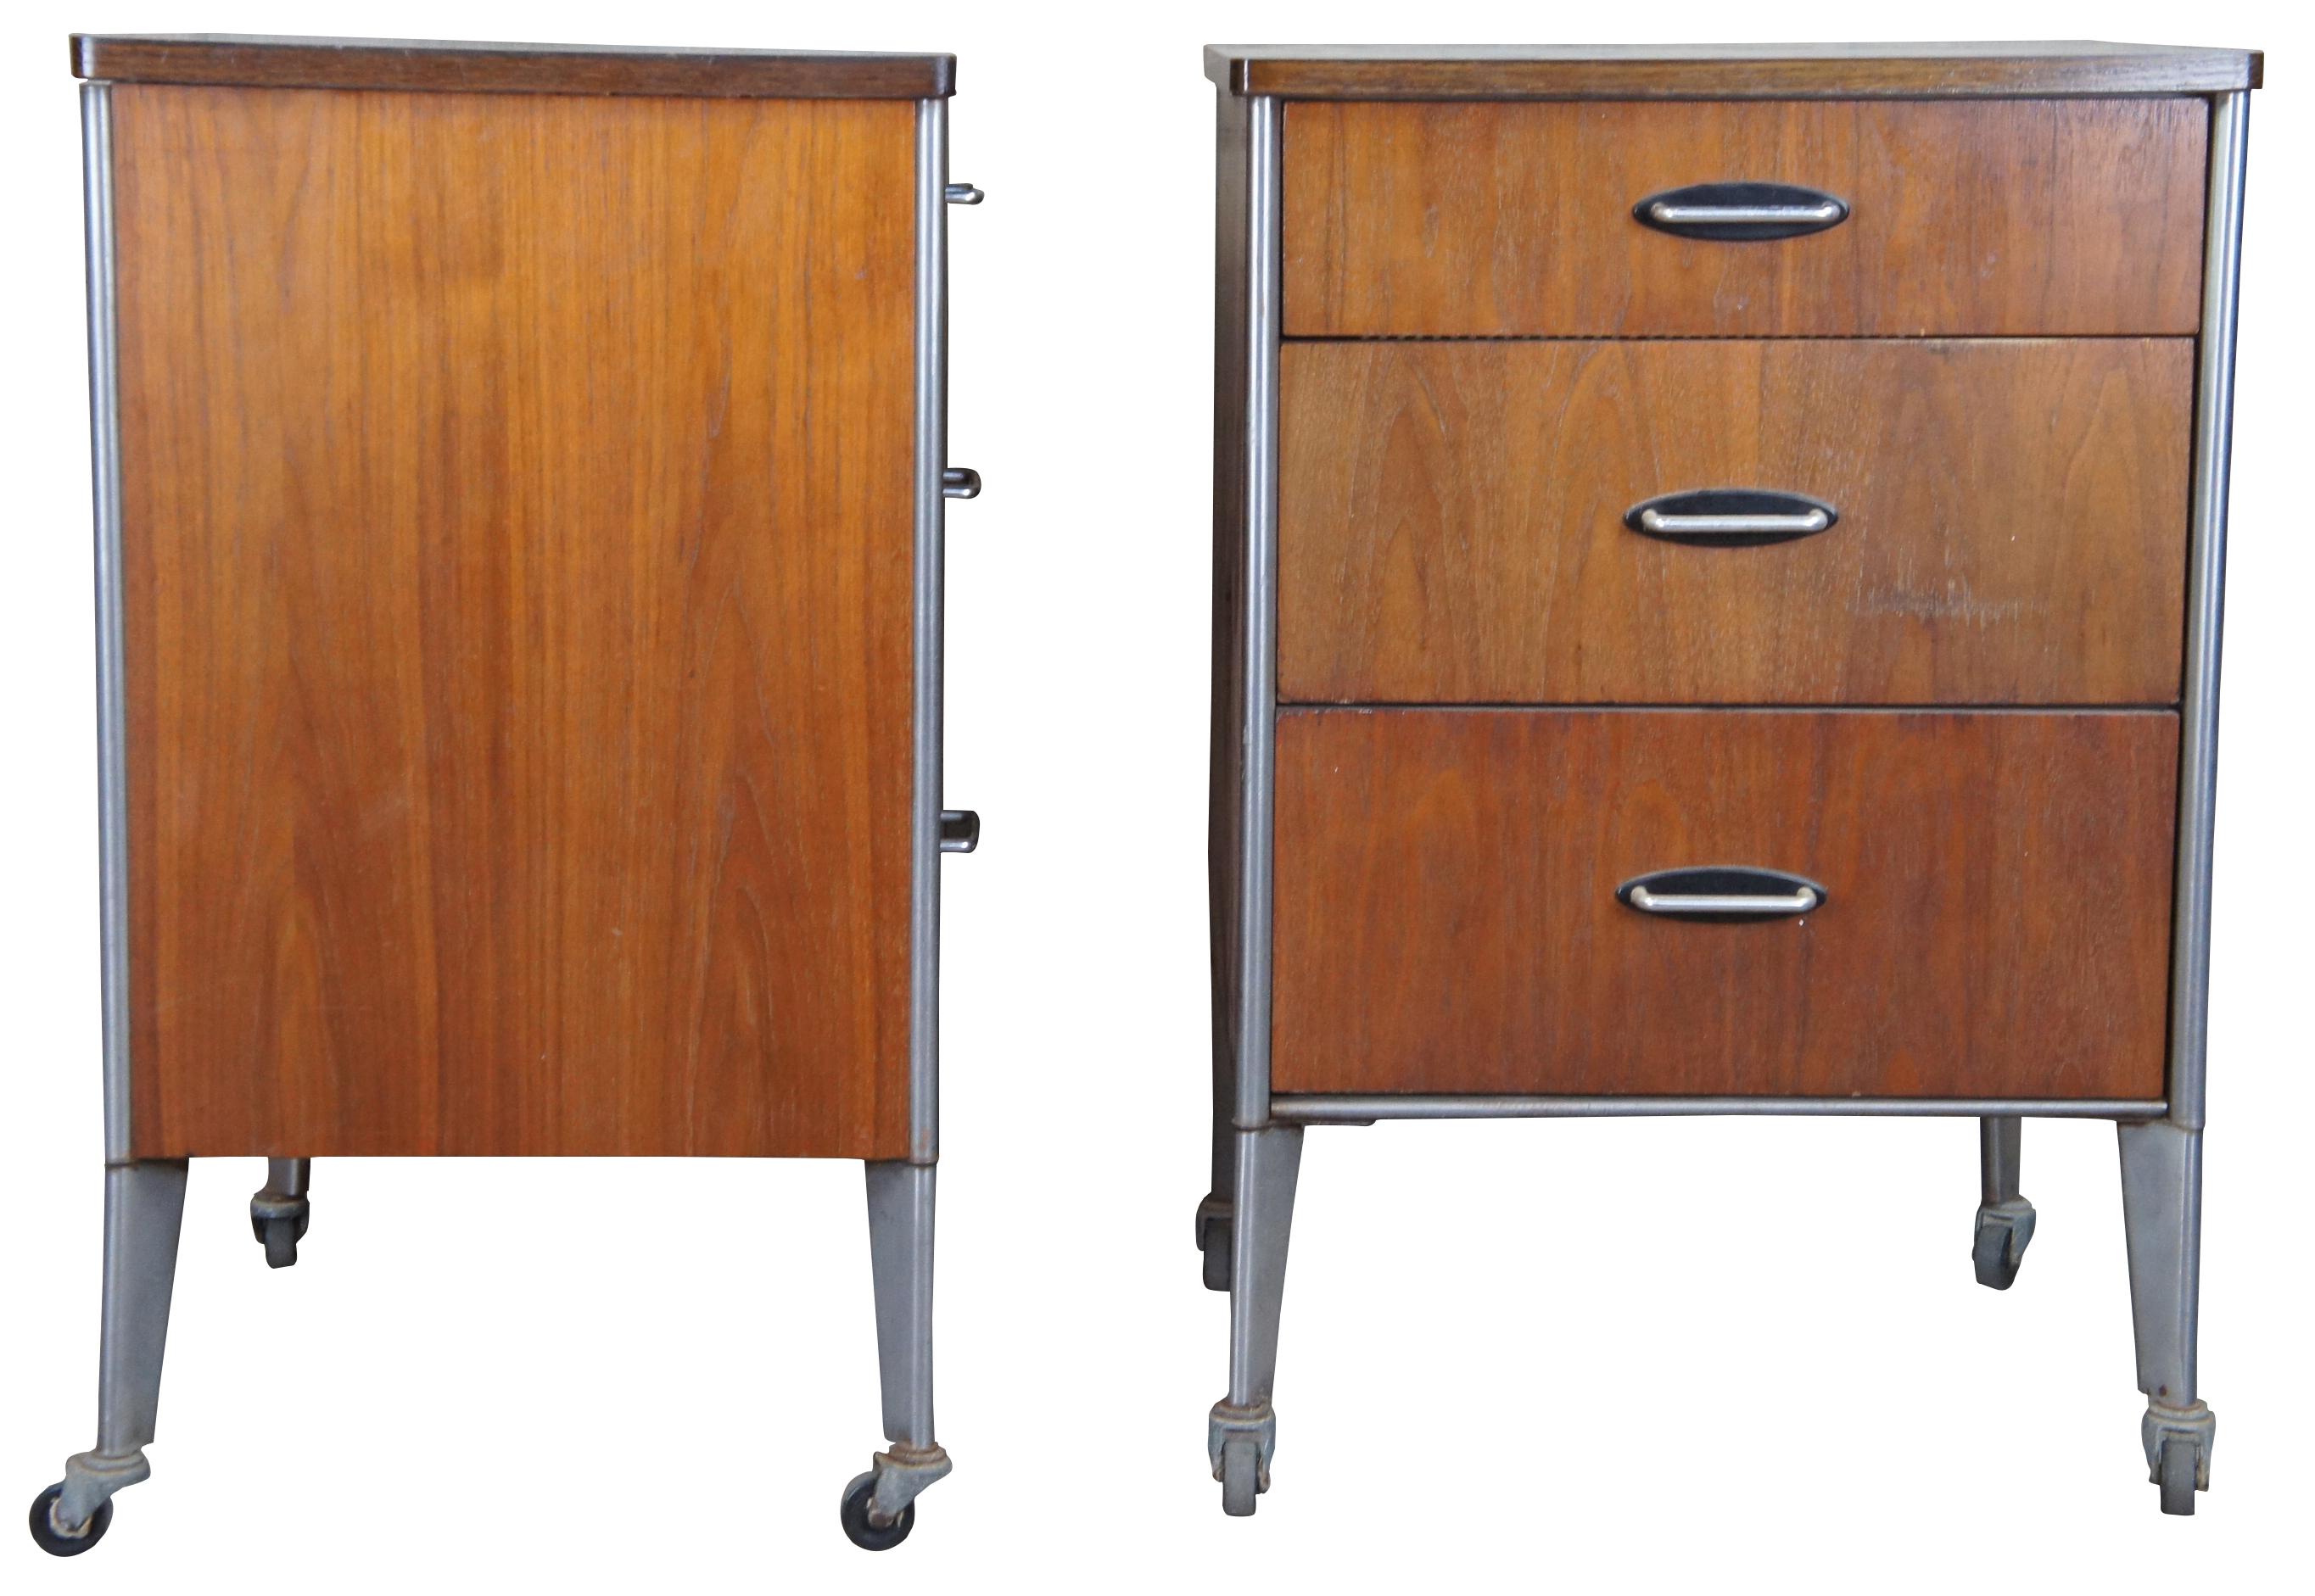 Vintage Mid-Century Modern Roymond Loewy Hill-Rom consoles or cabinets. Made of aluminum and walnut featuring three drawers and rolling swivel casters. Hill Rom was a branch of Romweber Furniture.
   